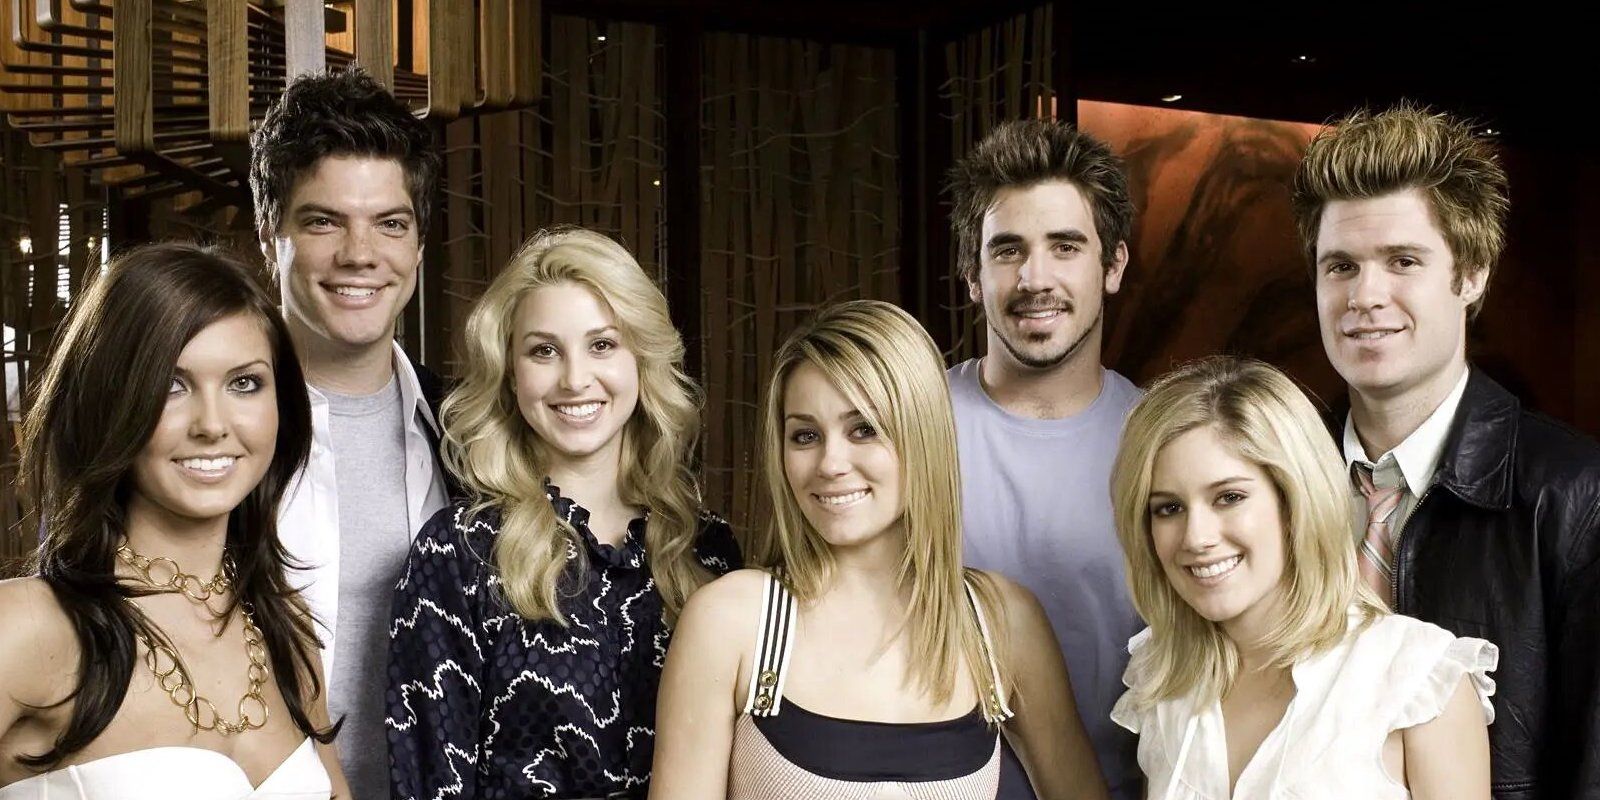 The Hills S1 cast smile for promo photo